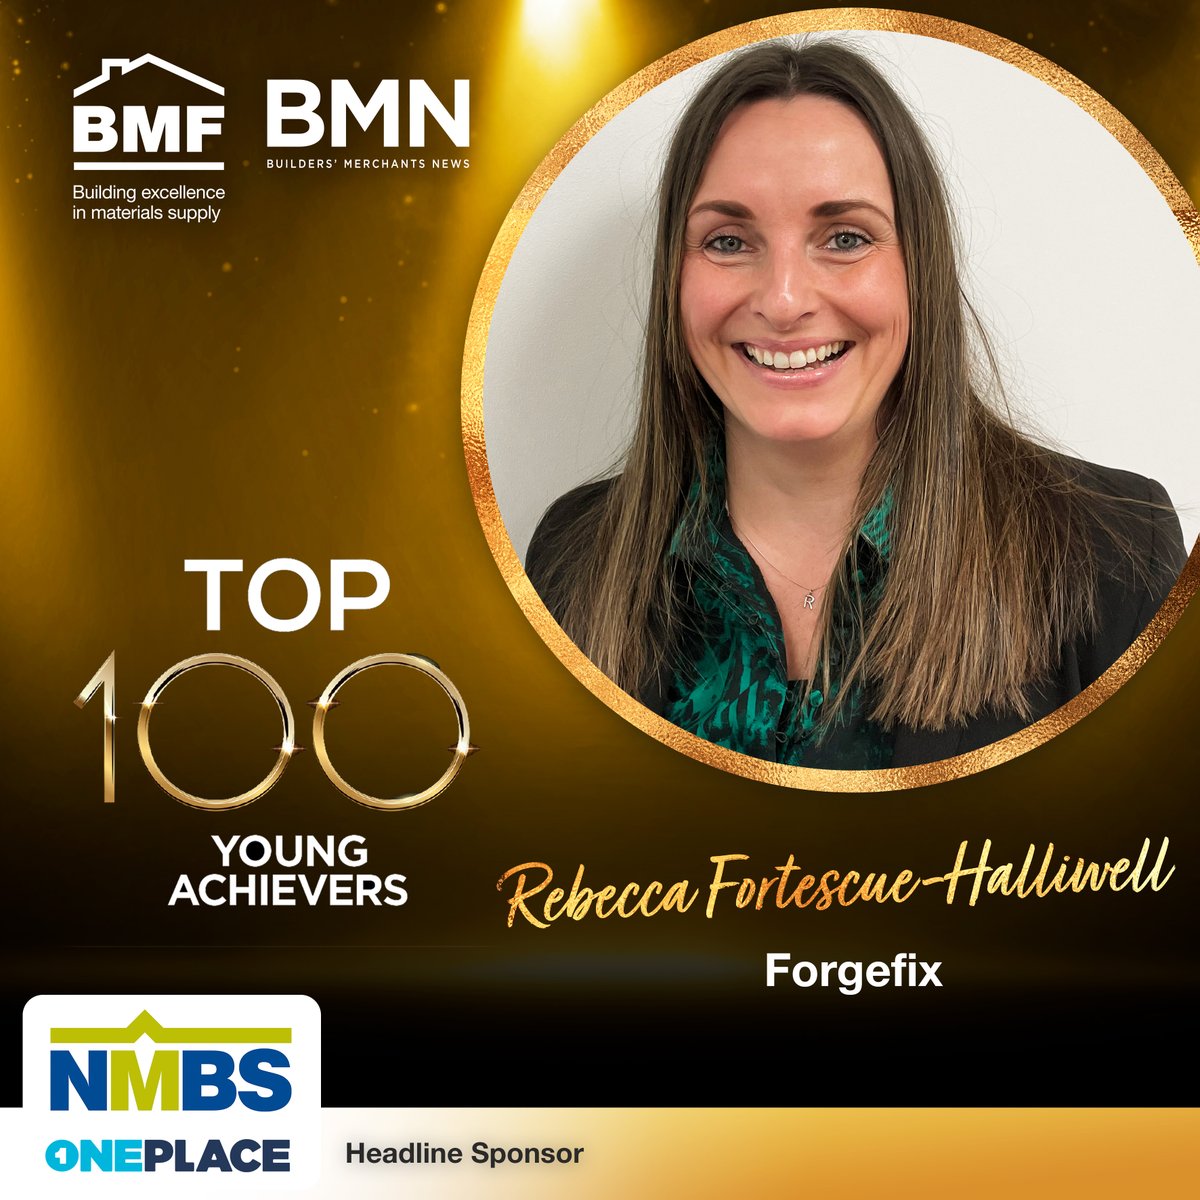 Up next for our BMF and @BMerchantsNews (BMN) Top 100 Young Achiever is Rebecca Fortescue-Halliwell, Head of Marketing & Digital Strategy at @ForgeFix. Our Top 100 Young Achiever nominees are kindly sponsored by our head sponsor, @NationalMerch #Top100YoungAchiever